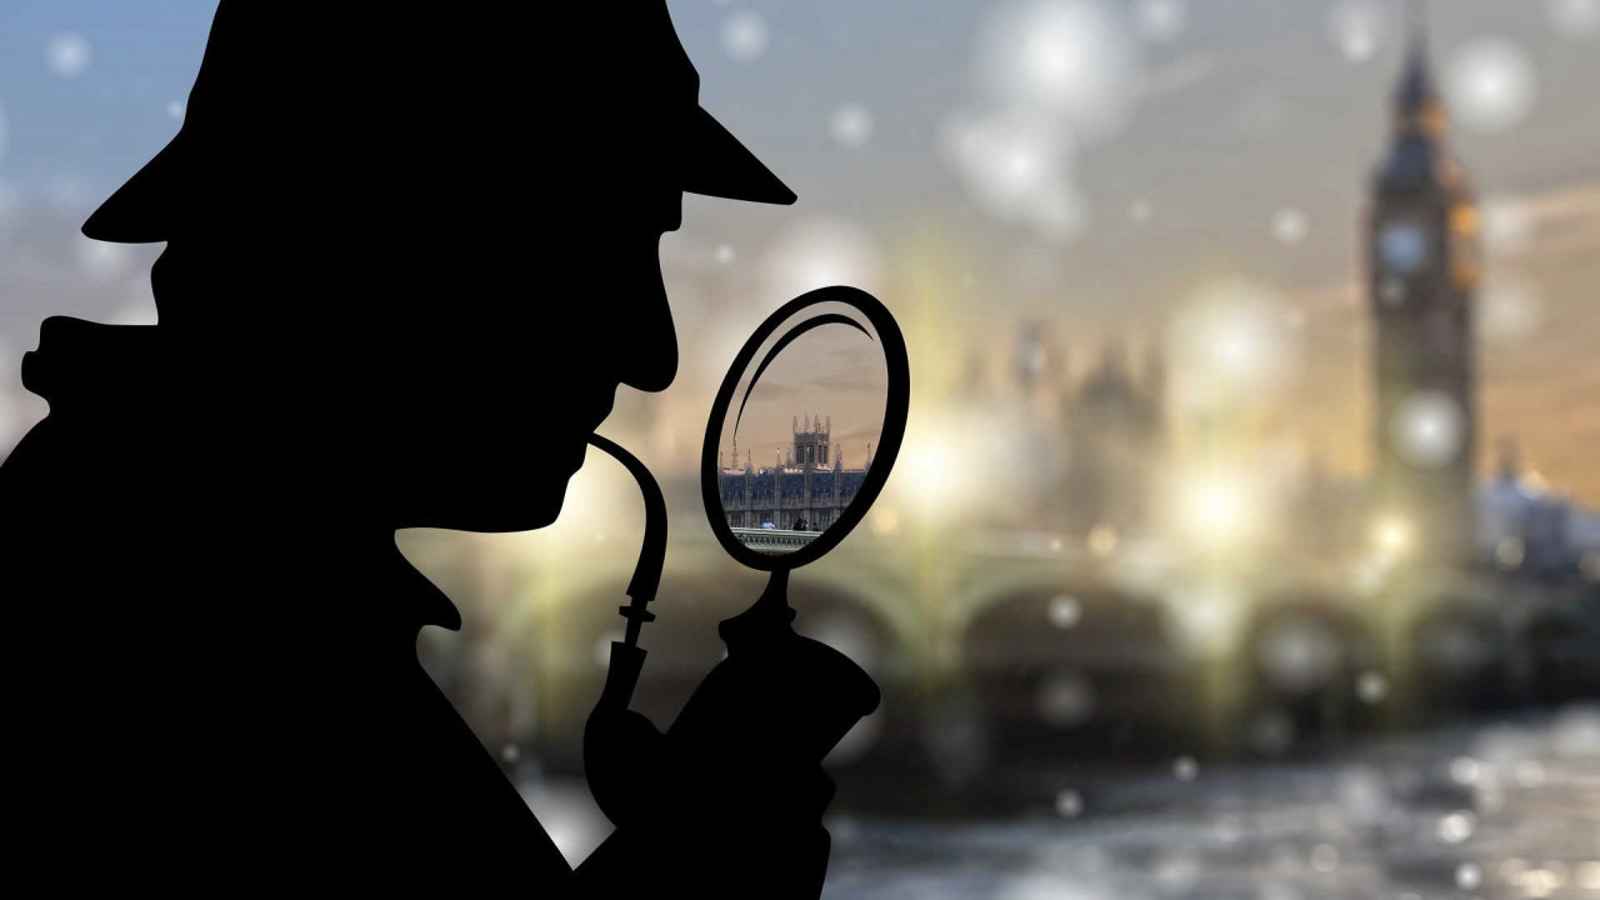 Sherlock Holmes Day 2023 Date, History, Facts, Activities